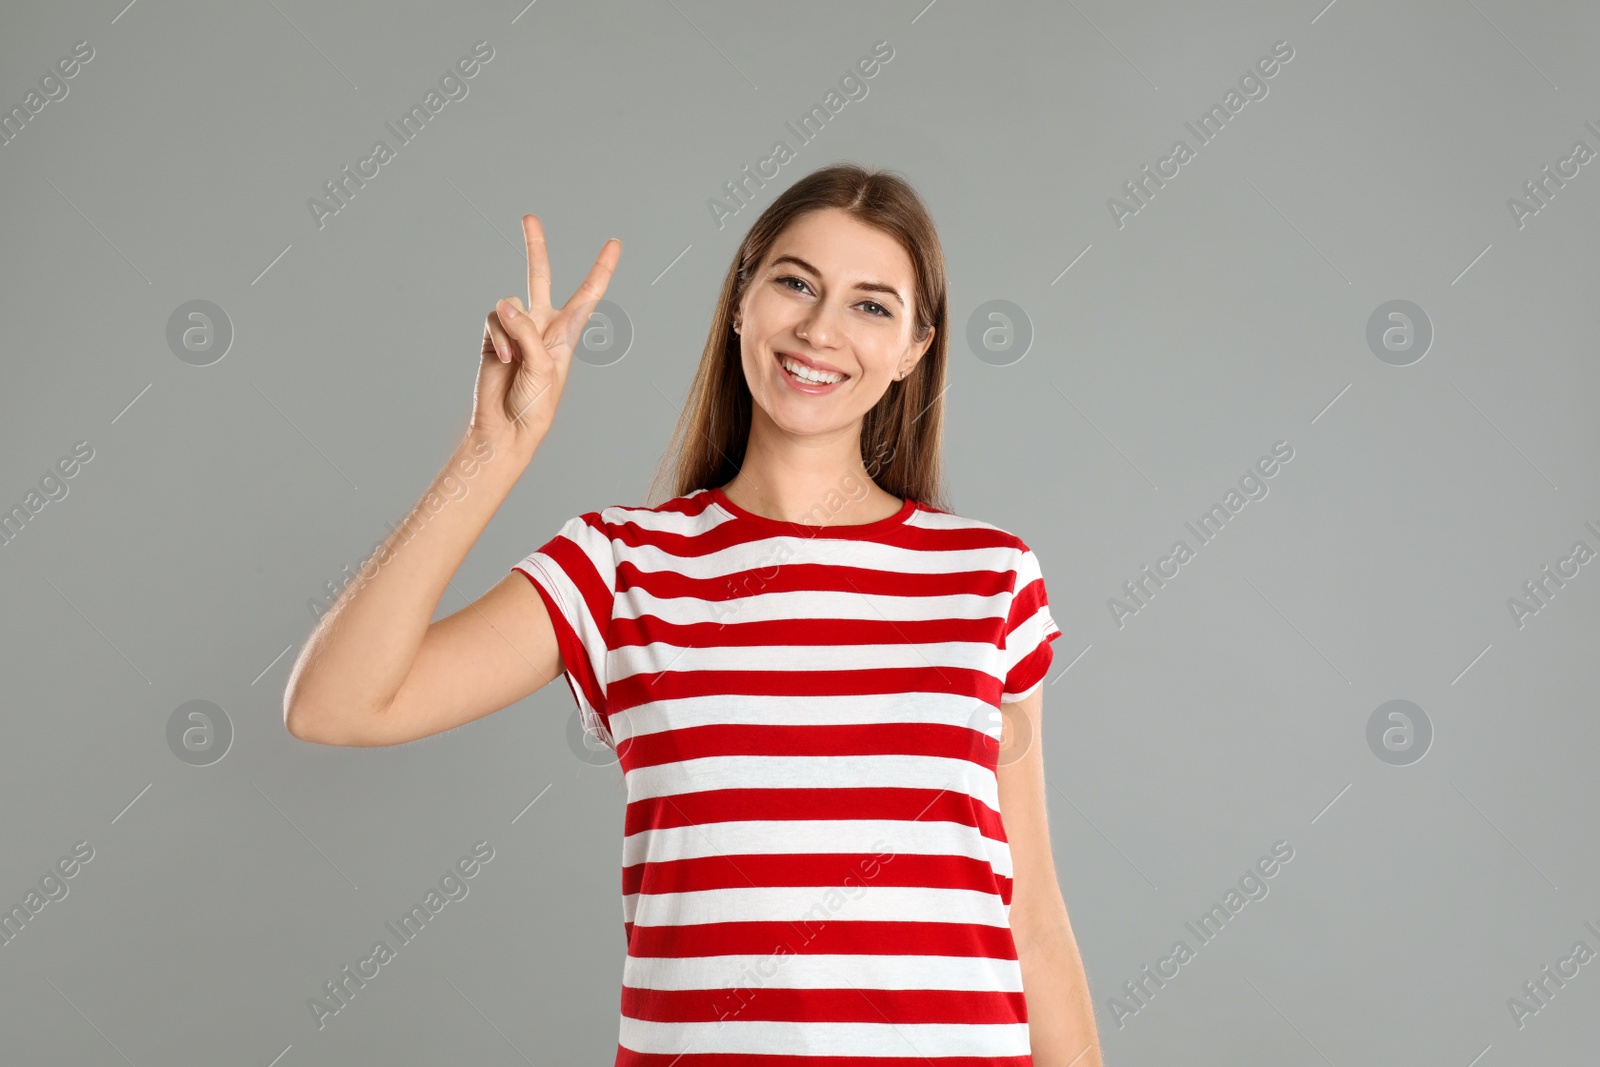 Photo of Woman showing number two with her hand on grey background